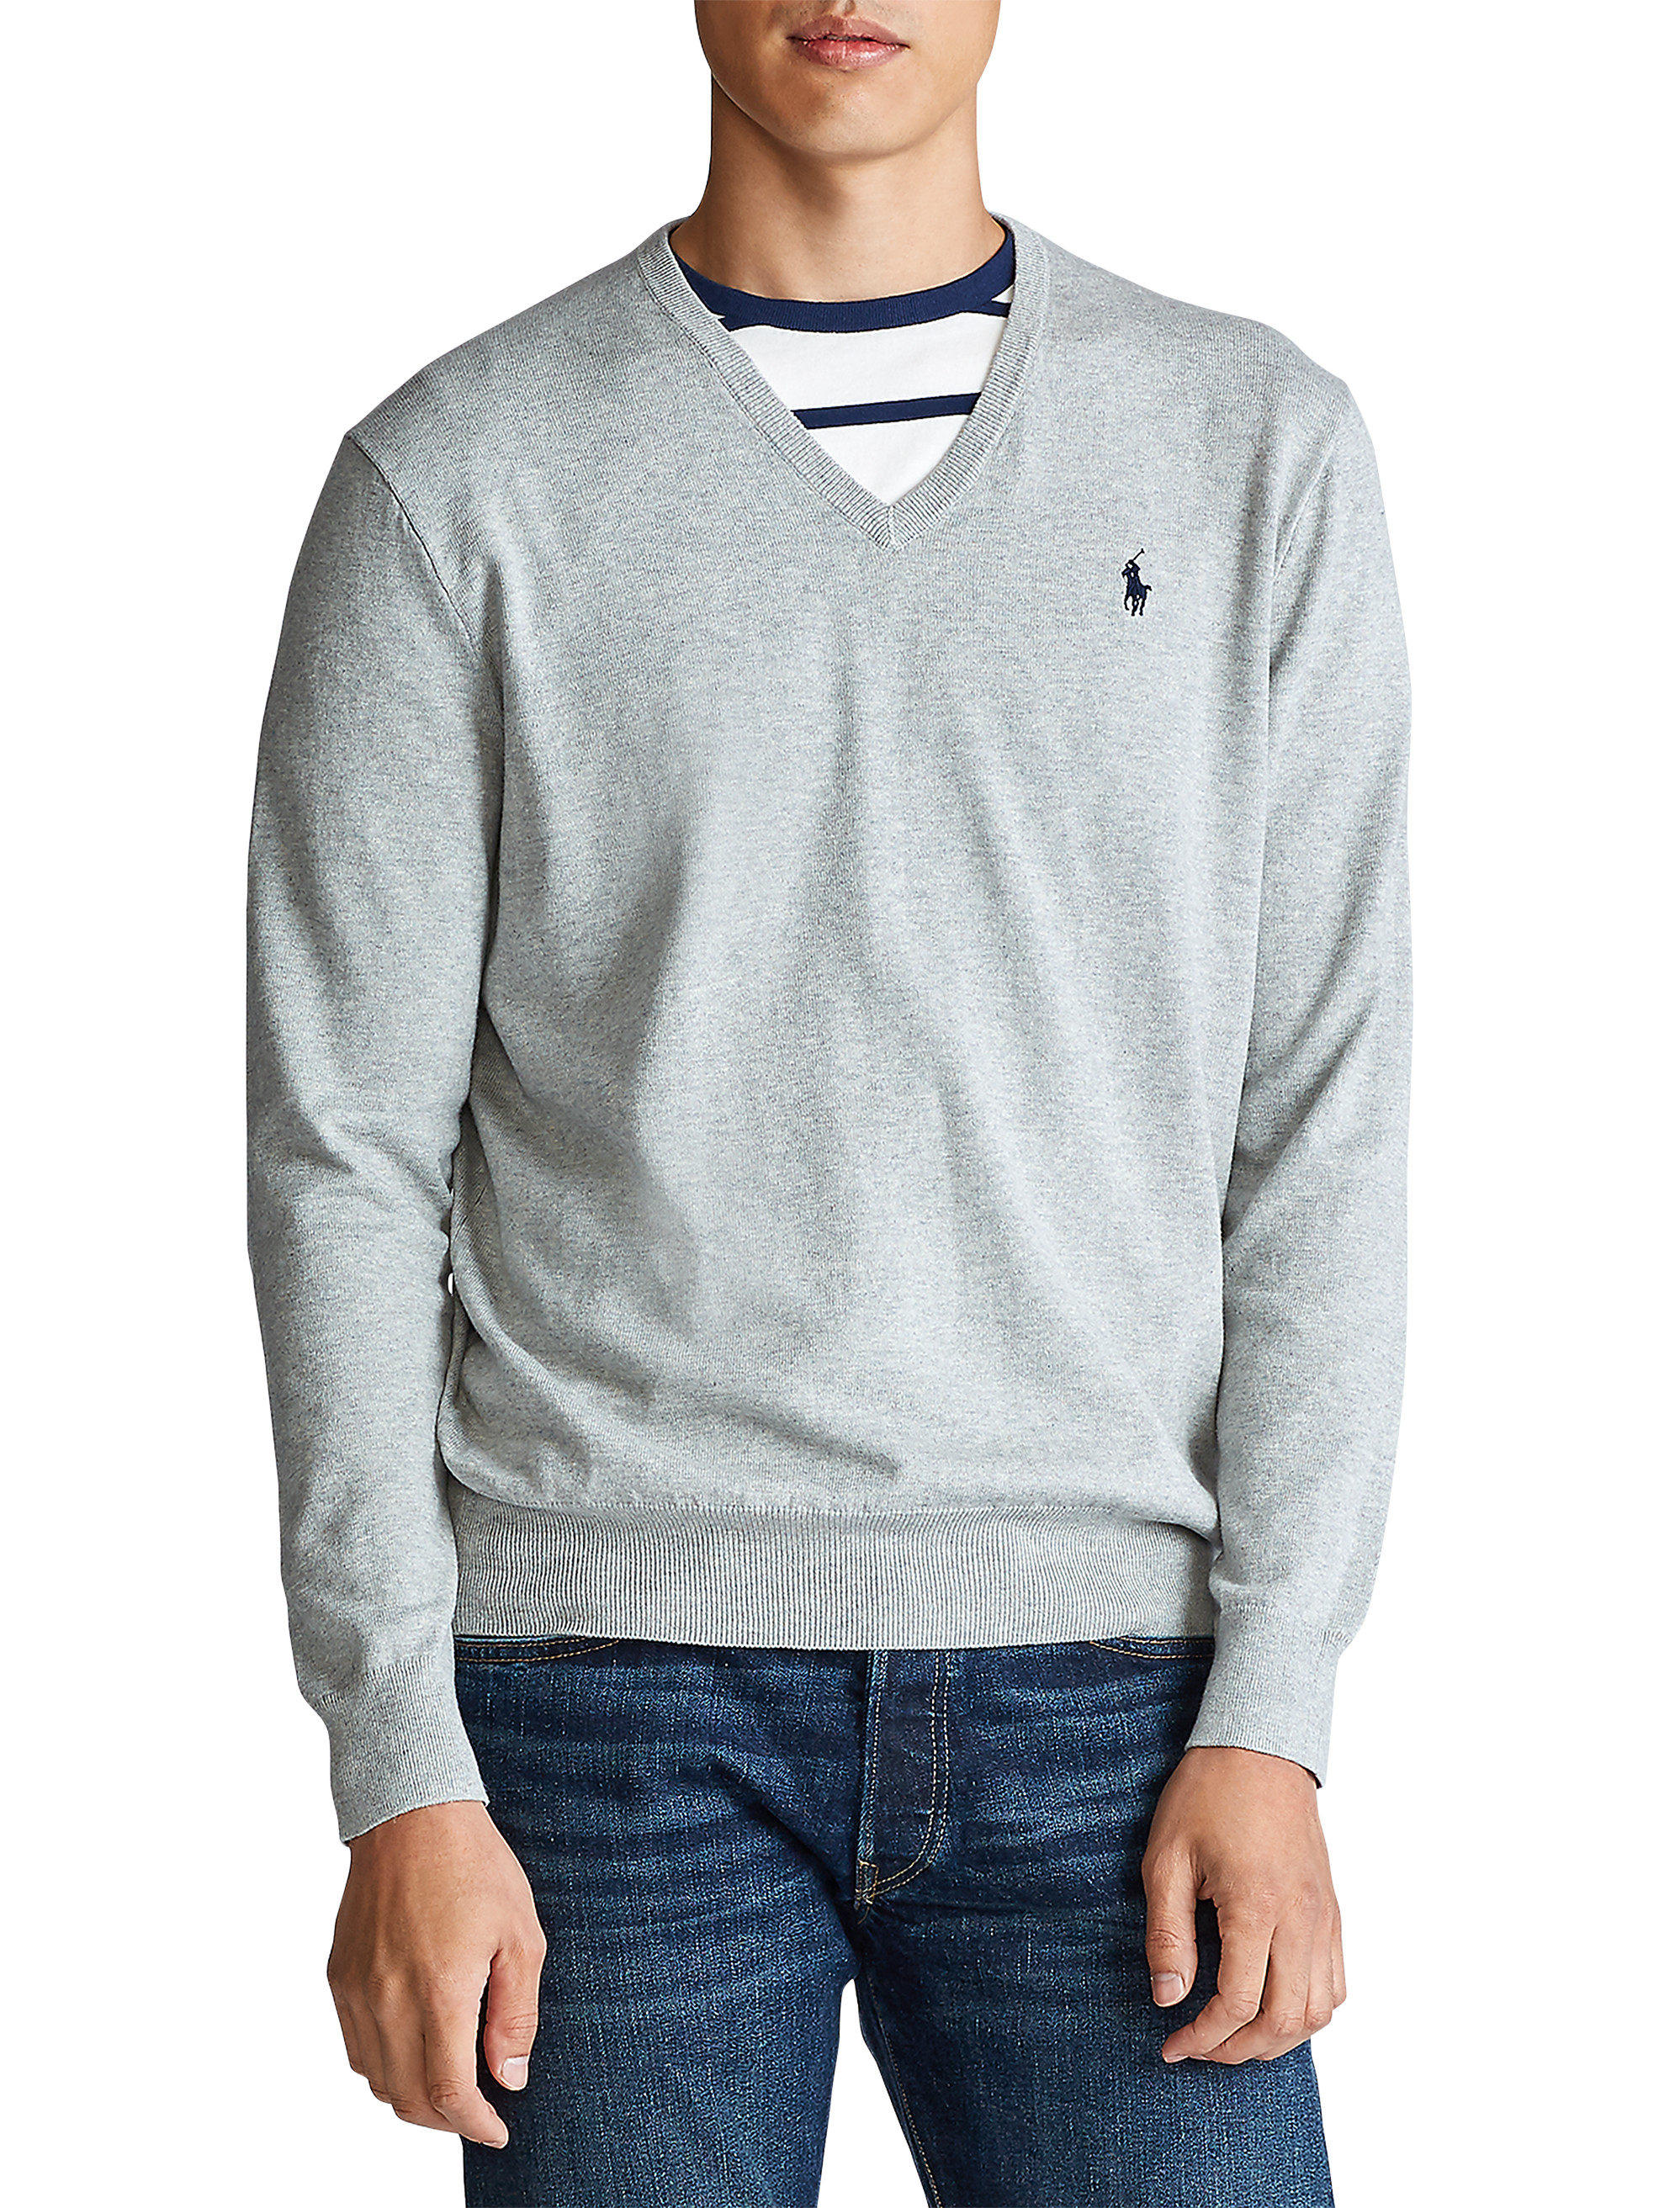 Polo Ralph Lauren Big And Tall Long-Sleeve V-Neck T-Shirt in White